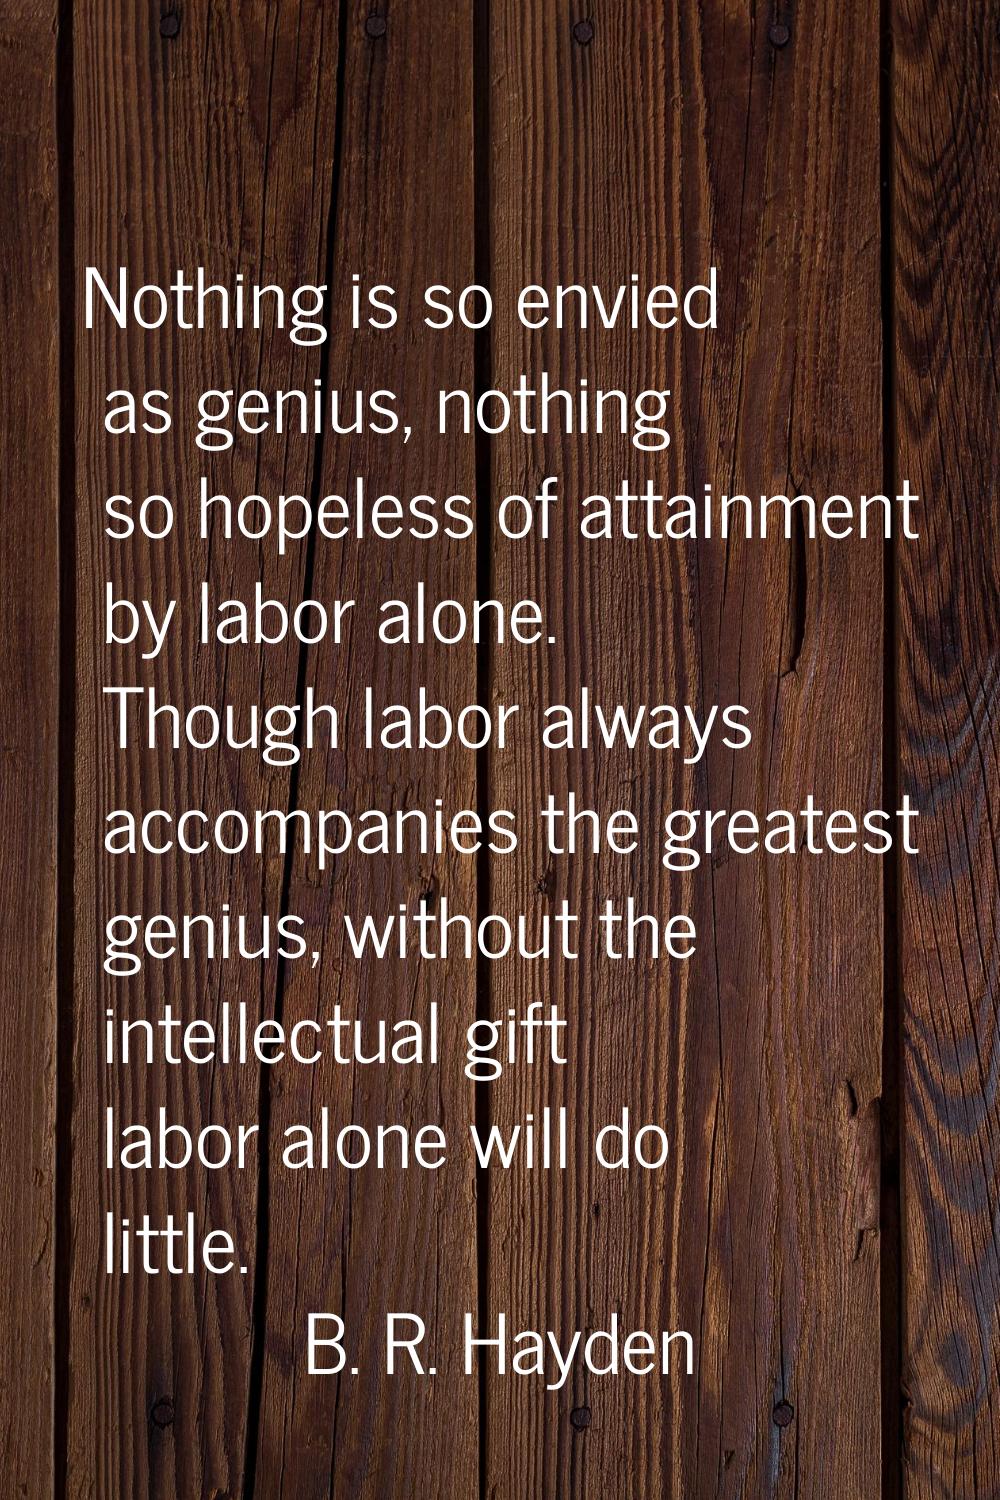 Nothing is so envied as genius, nothing so hopeless of attainment by labor alone. Though labor alwa